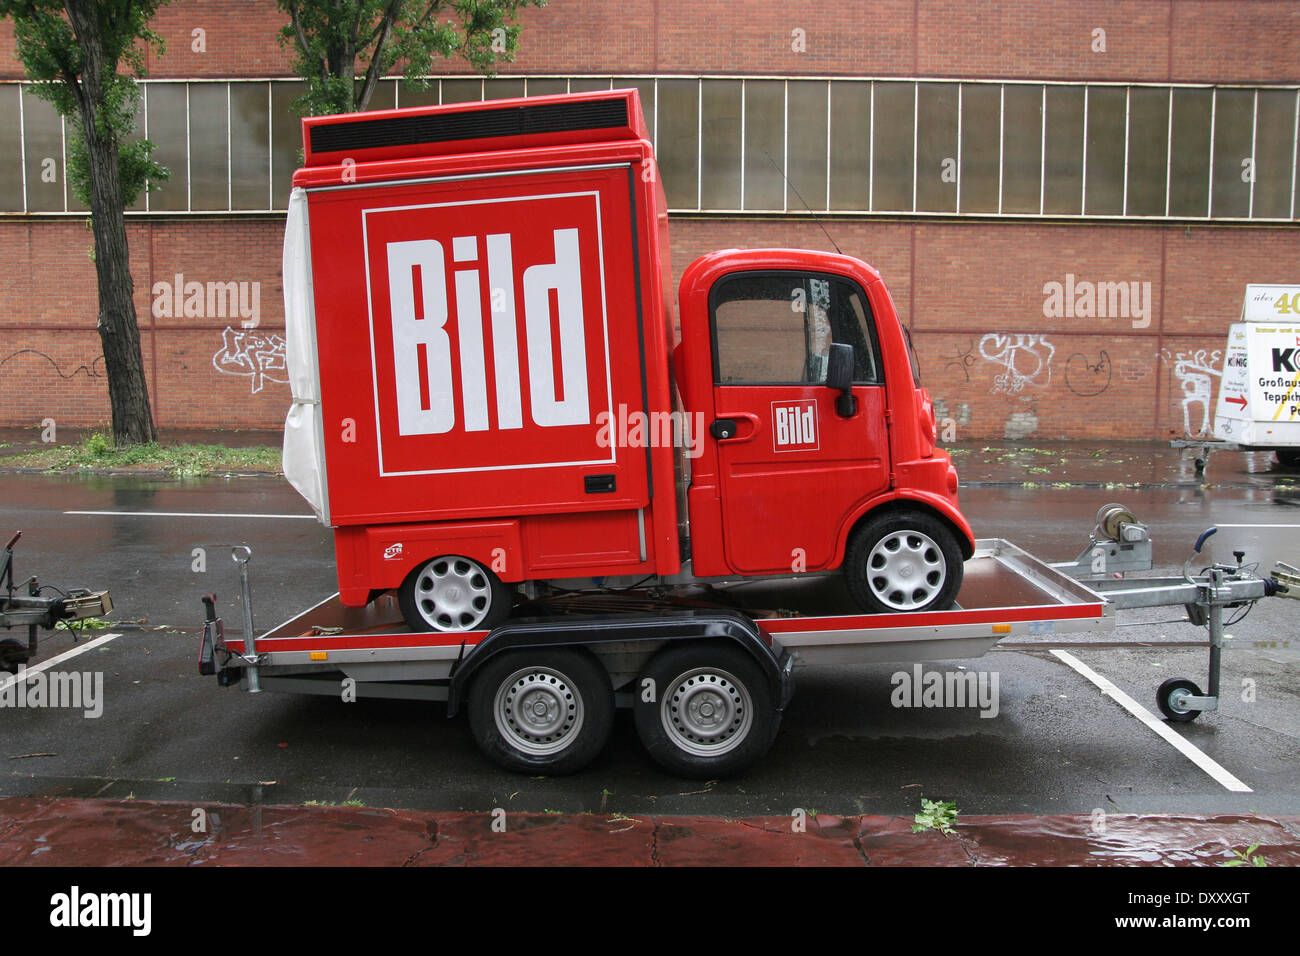 BILD logo on a short red car in Cologne, Germany. Stock Photo